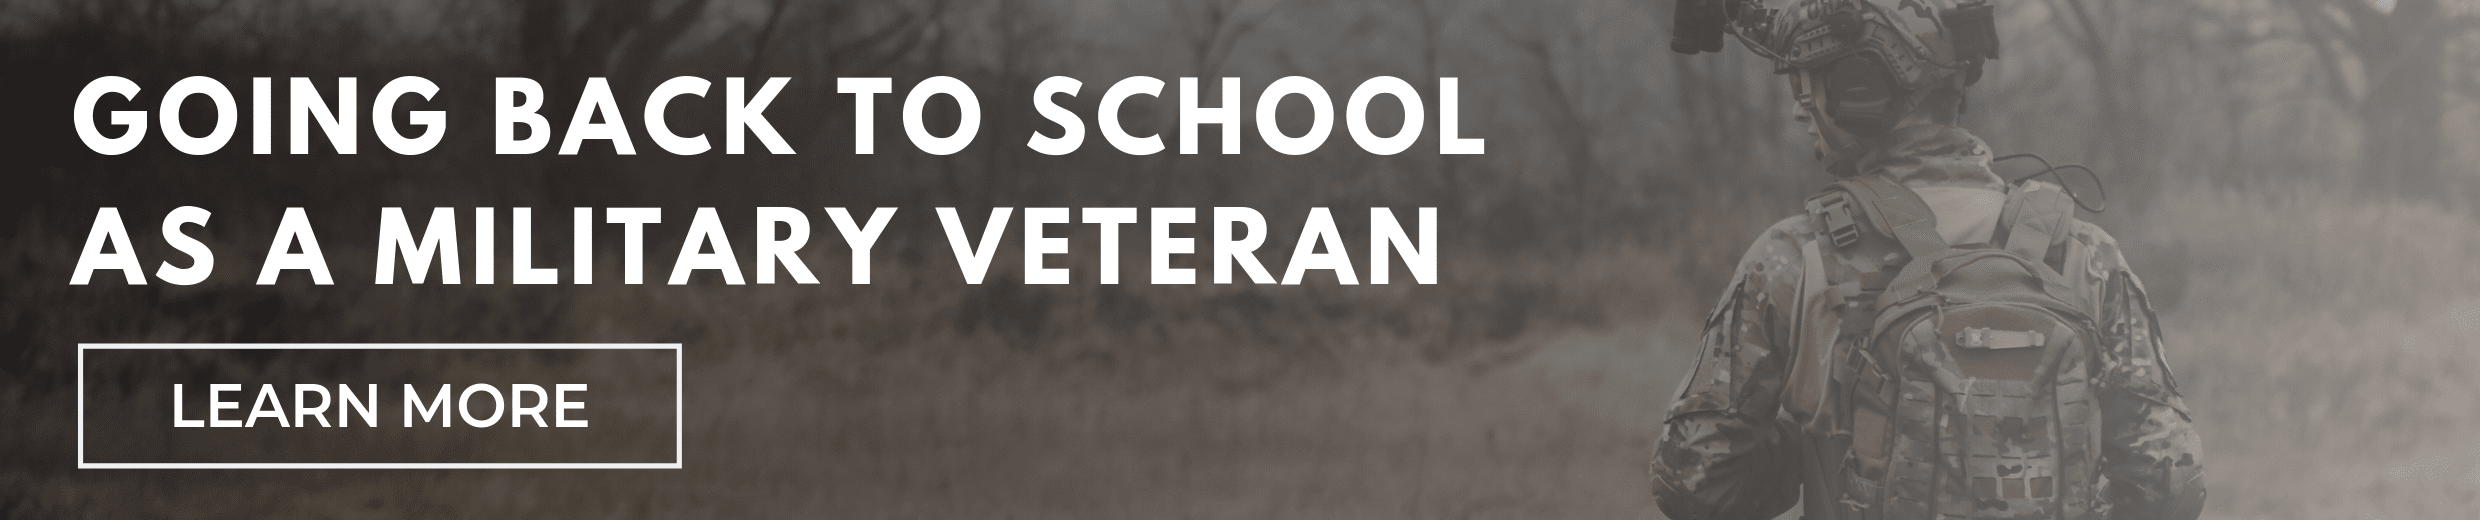 Going Back to School as a Military Veteran